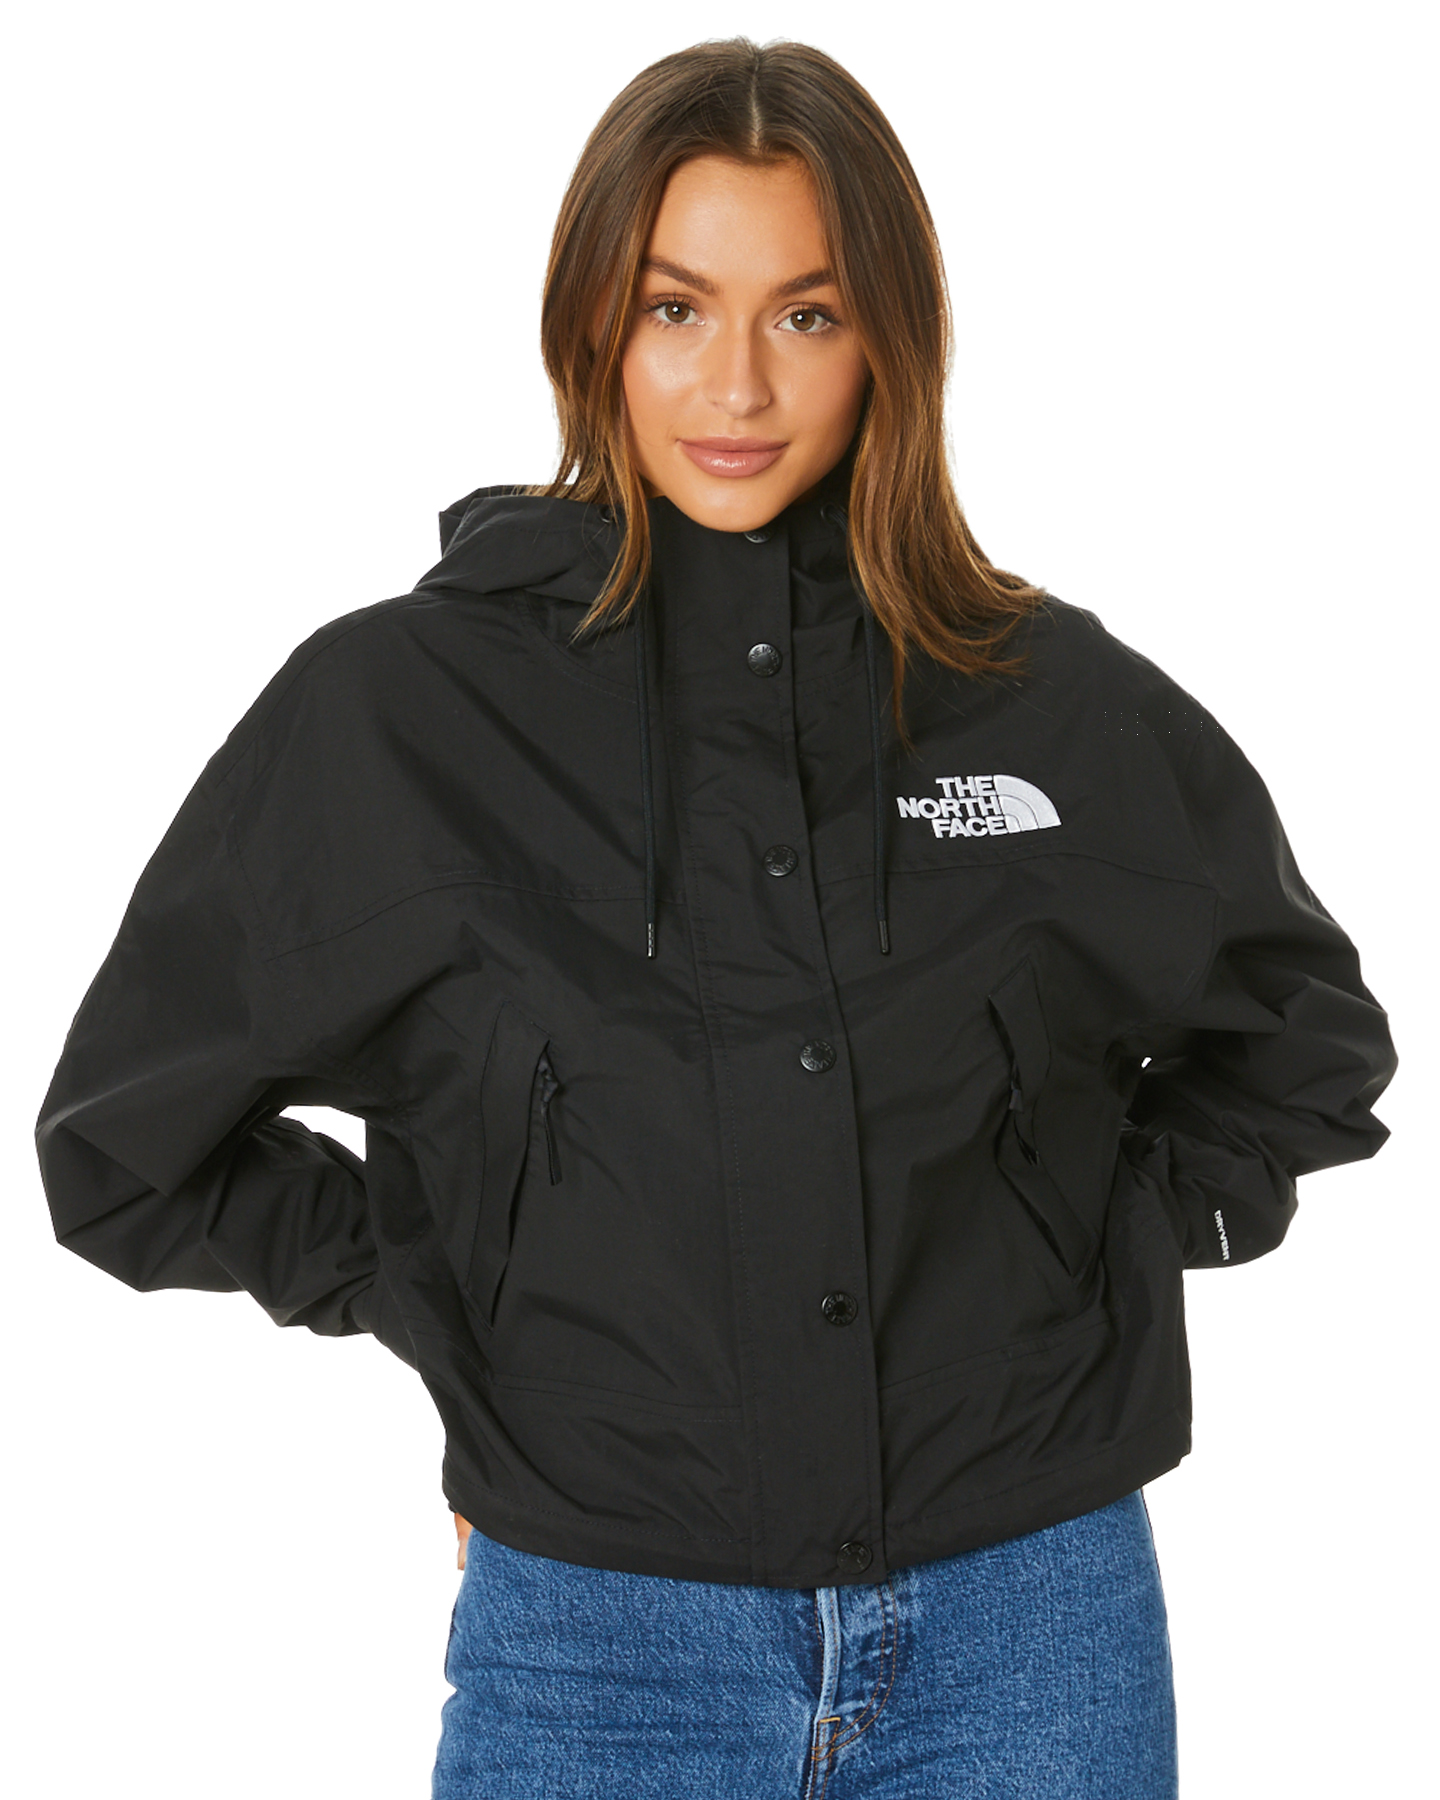 unidays the north face